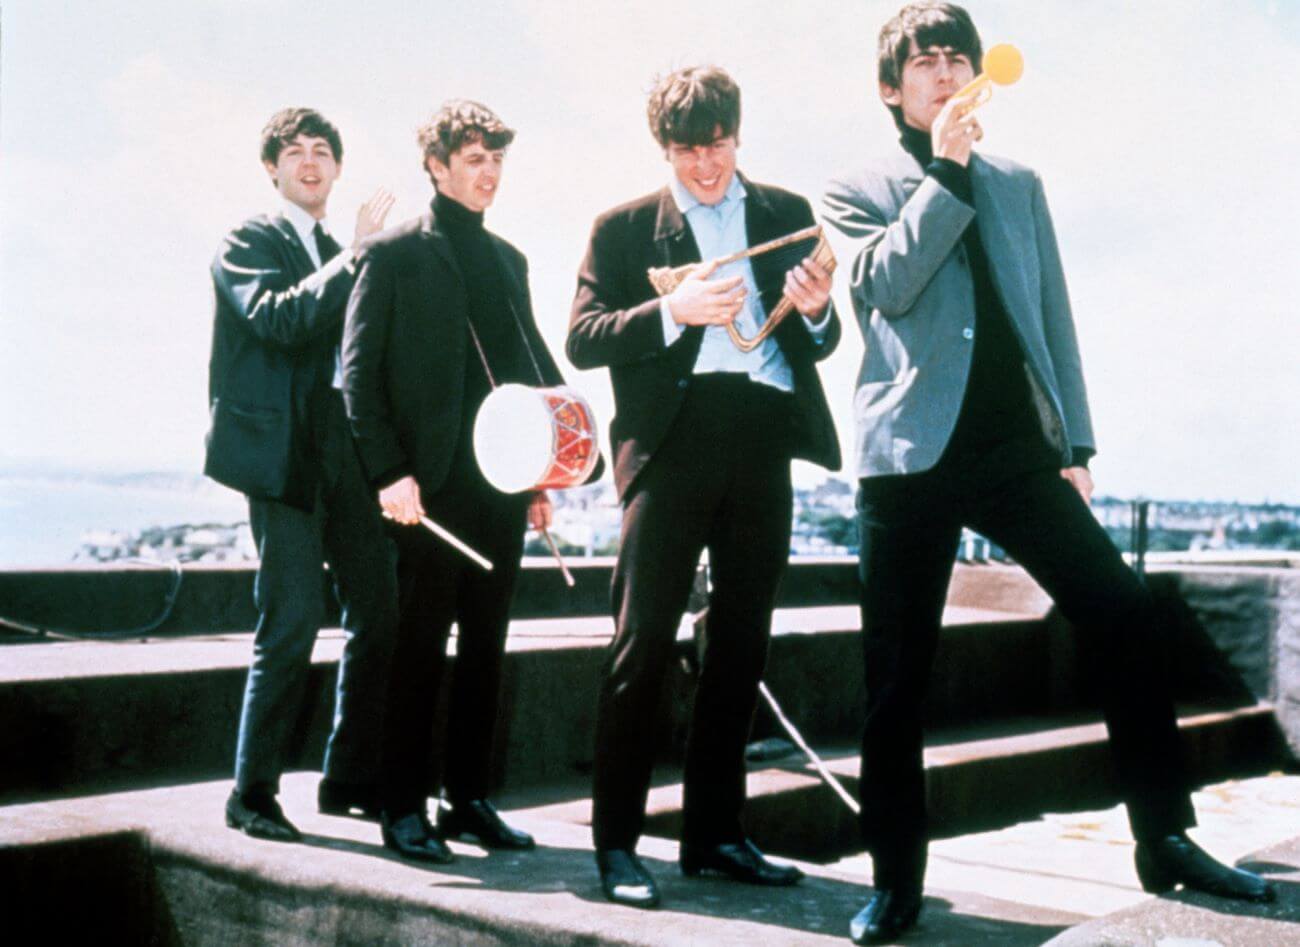 The Beatles stand on a rooftop with small instruments.